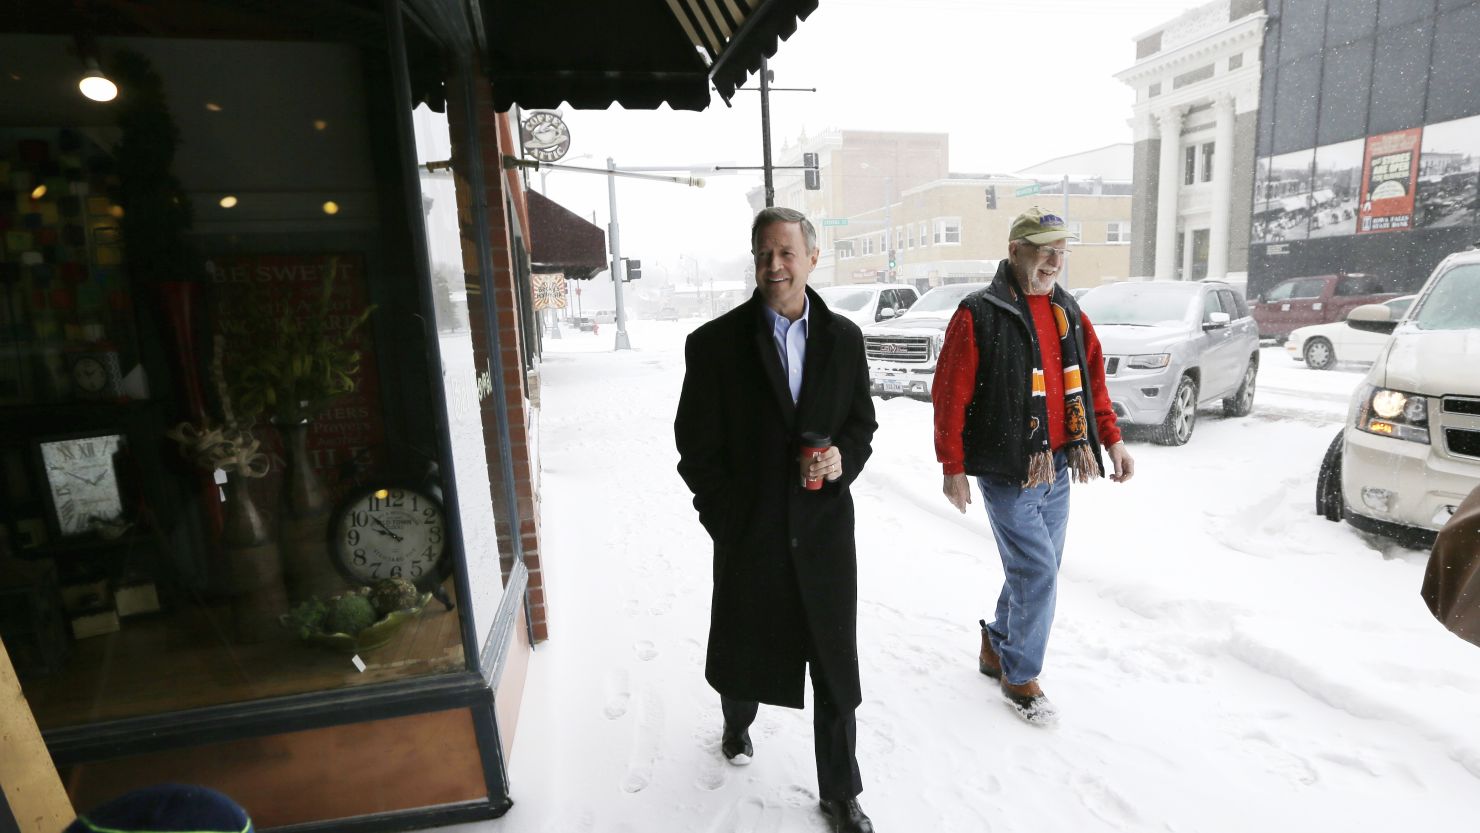 Democratic presidential candidate, former Maryland Gov. Martin O'Malley walks in the snow with Jerry Welden of Iowa Falls, Iowa, down main street in Iowa Falls, Iowa, Monday, Dec. 28, 2015, after speaking at the Hardin County New Leadership Forum. (AP Photo/Charlie Neibergall)